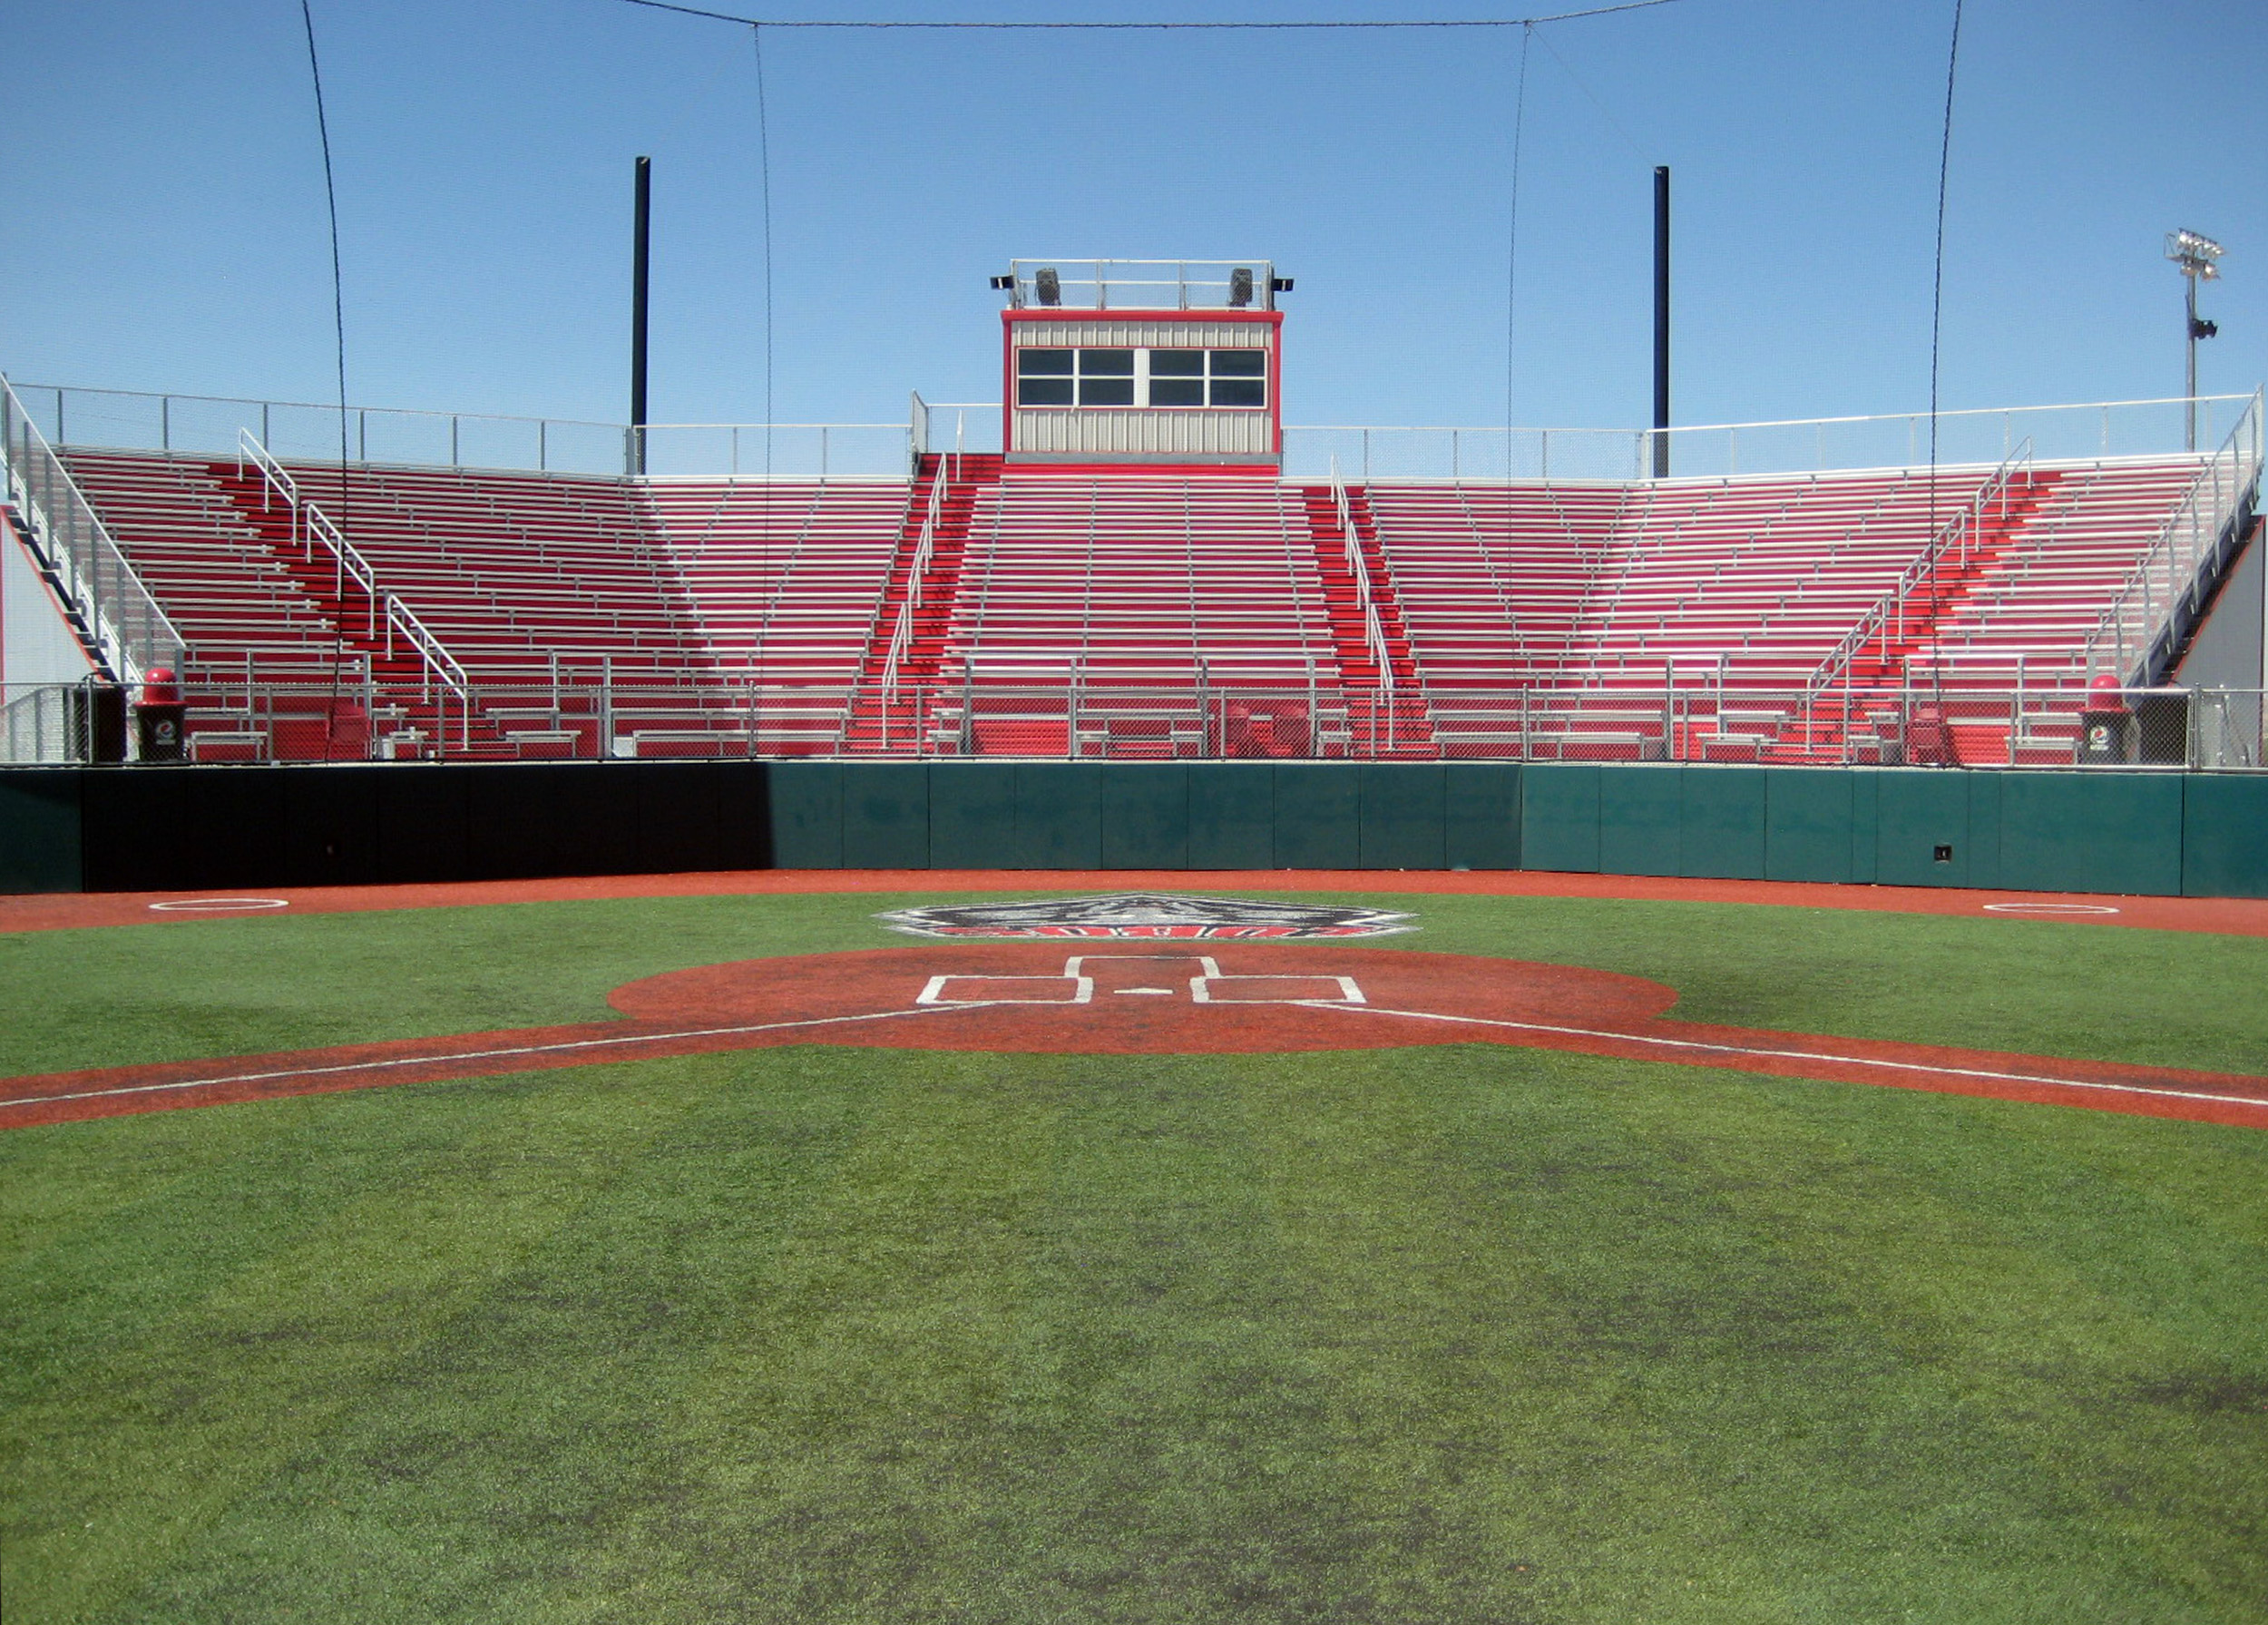 Wilson & Company provided civil engineering and architecture design for the University of New Mexico baseball field.